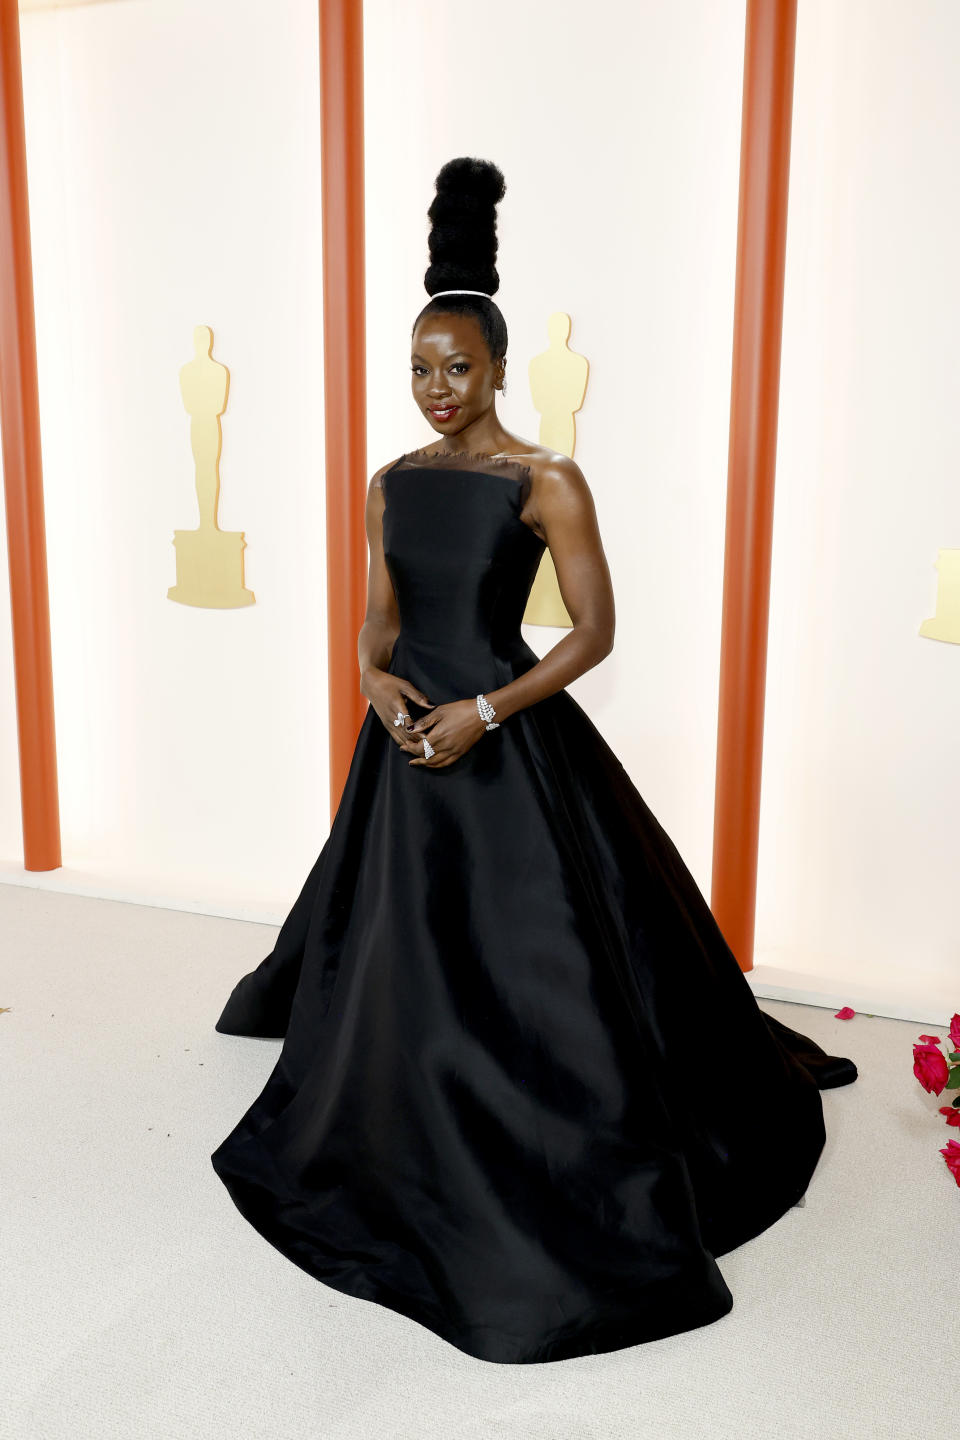 HOLLYWOOD, CALIFORNIA - MARCH 12:  Danai Gurira attends the 95th Annual Academy Awards on March 12, 2023 in Hollywood, California. (Photo by Mike Coppola/Getty Images)